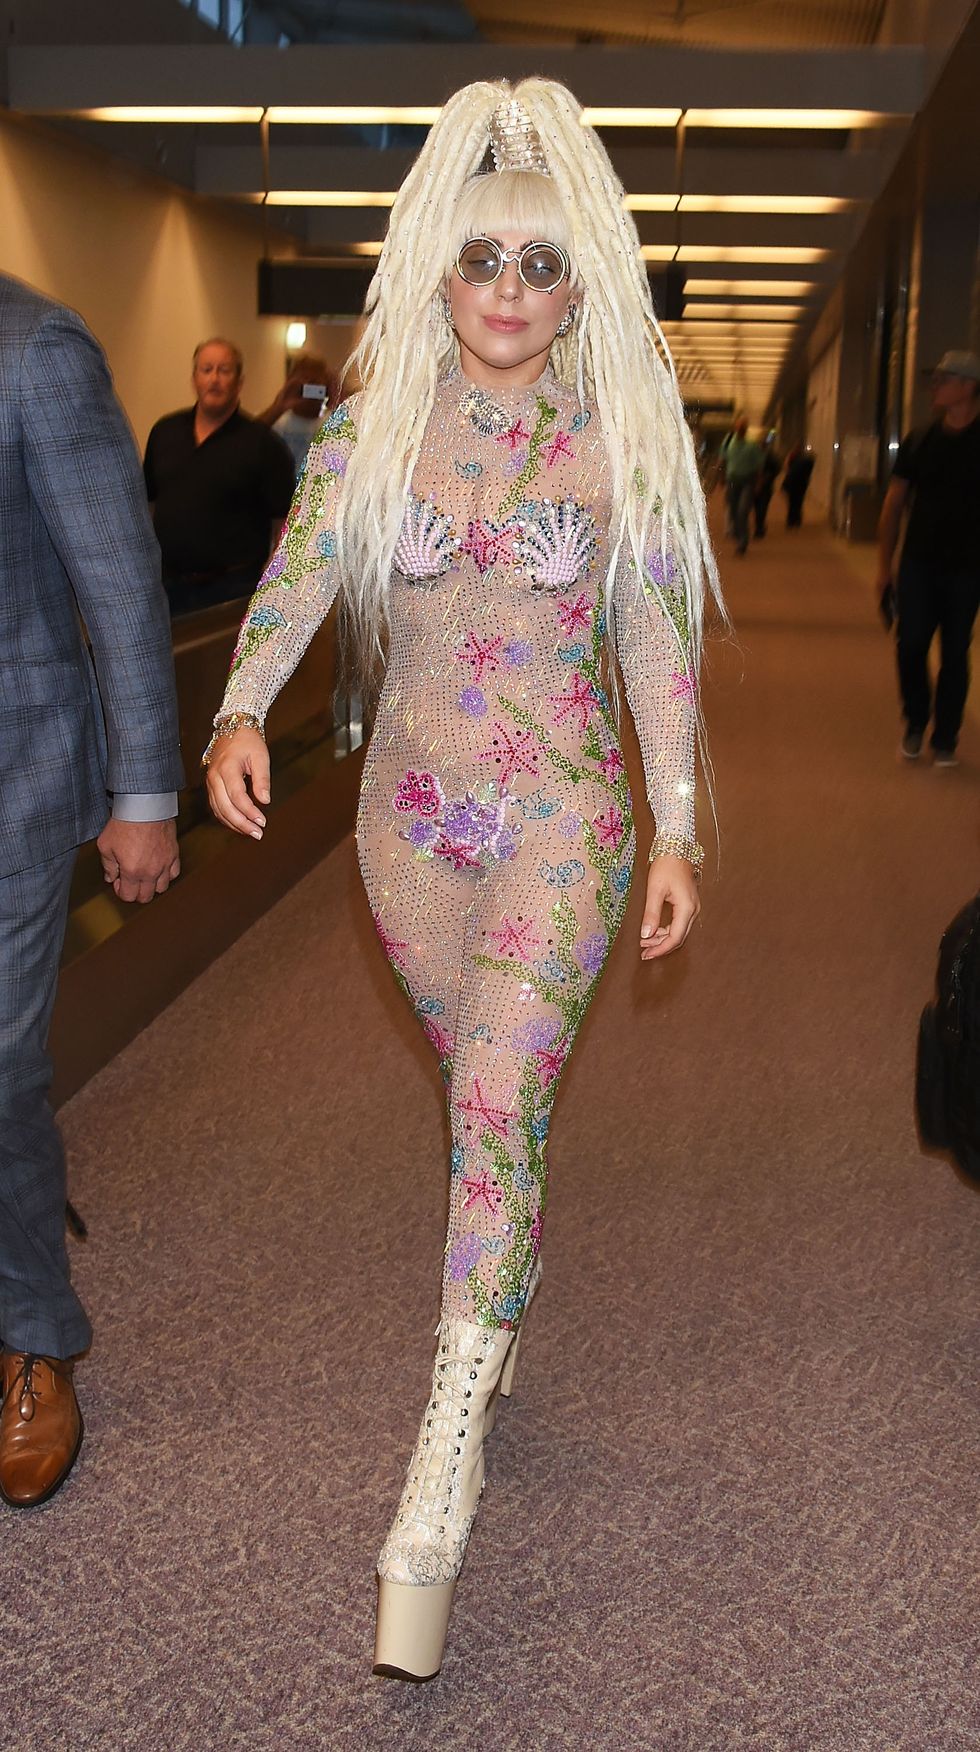 Lady Gaga in Japan wearing ocean-inspired, shell-adorned, sequinned jumpsuit - celebrity style photos - comsopolitan.co.uk